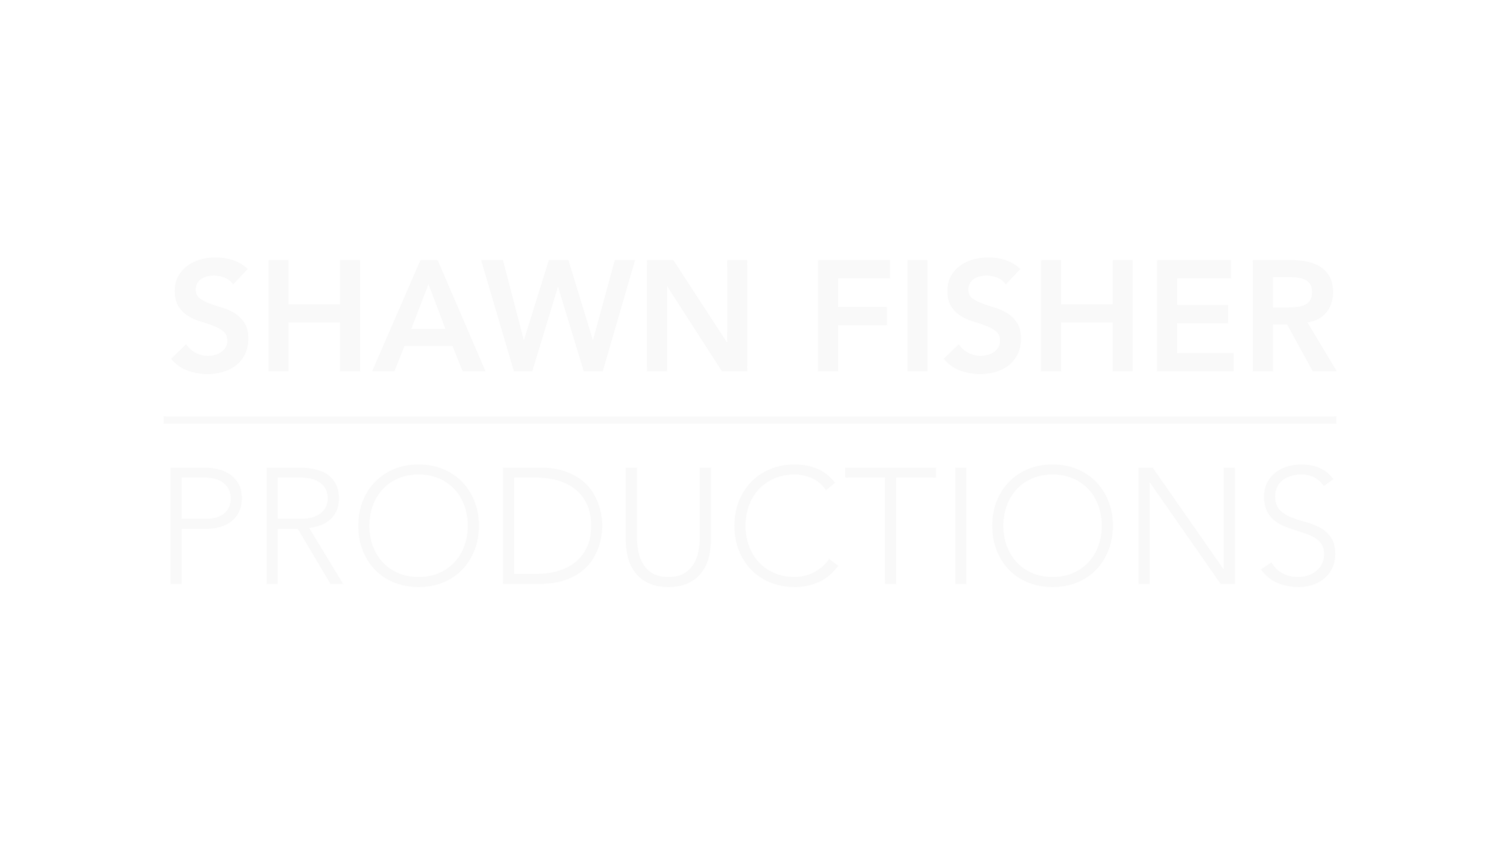 Shawn Fisher Productions